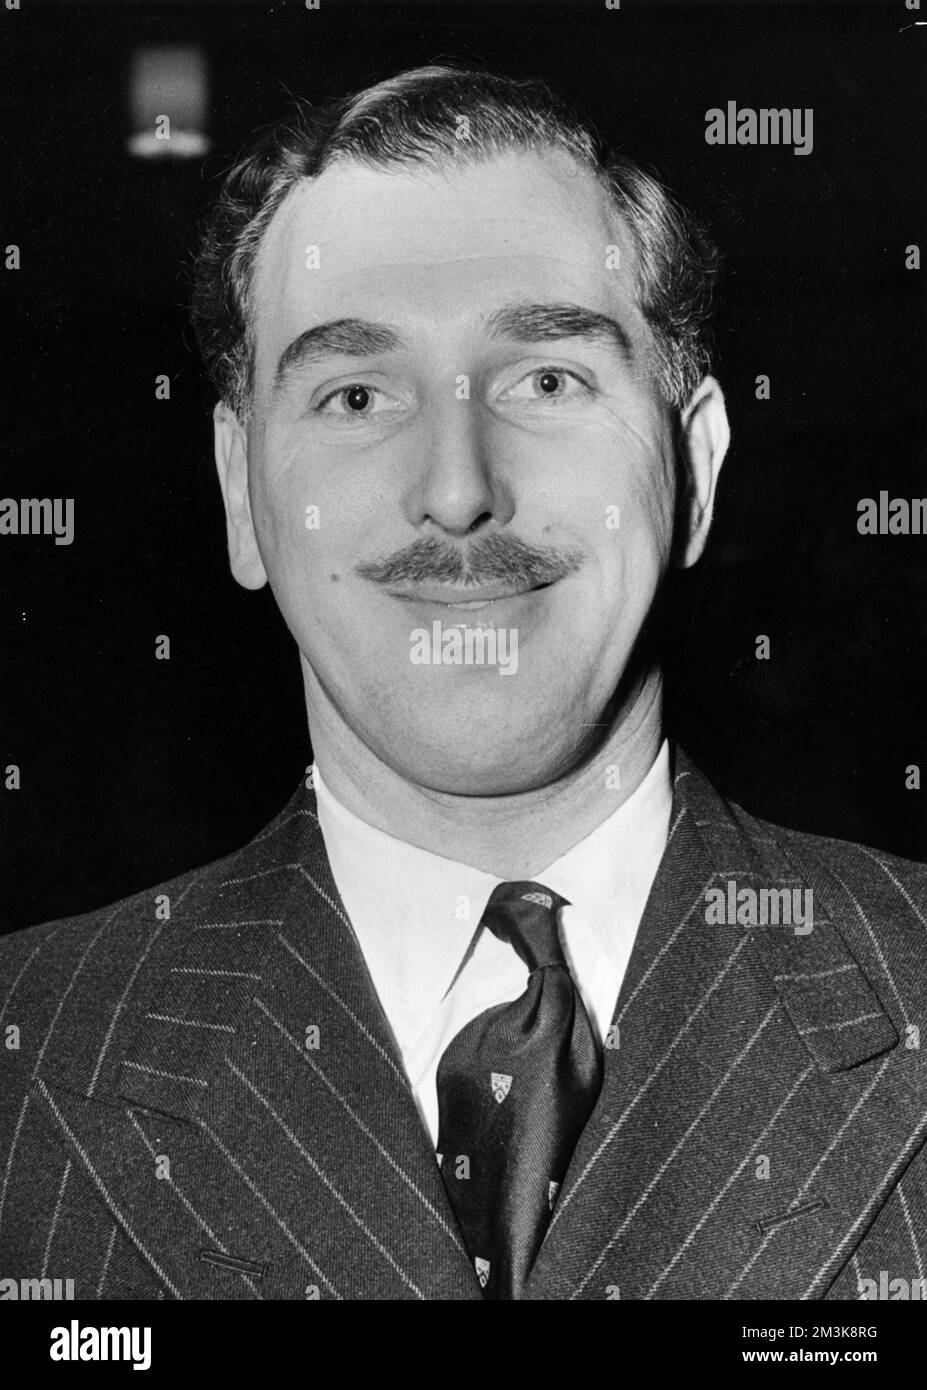 Peter Dimmock, sports television producer and broadcaster.  Well known as presenter of Sportsview and first presenter of BBC Sports Personality of the Year.  Went on to become Head of BBC outside broadcasting and then head of BBC Enterprises in the 1970s.     Date: c.1950 Stock Photo